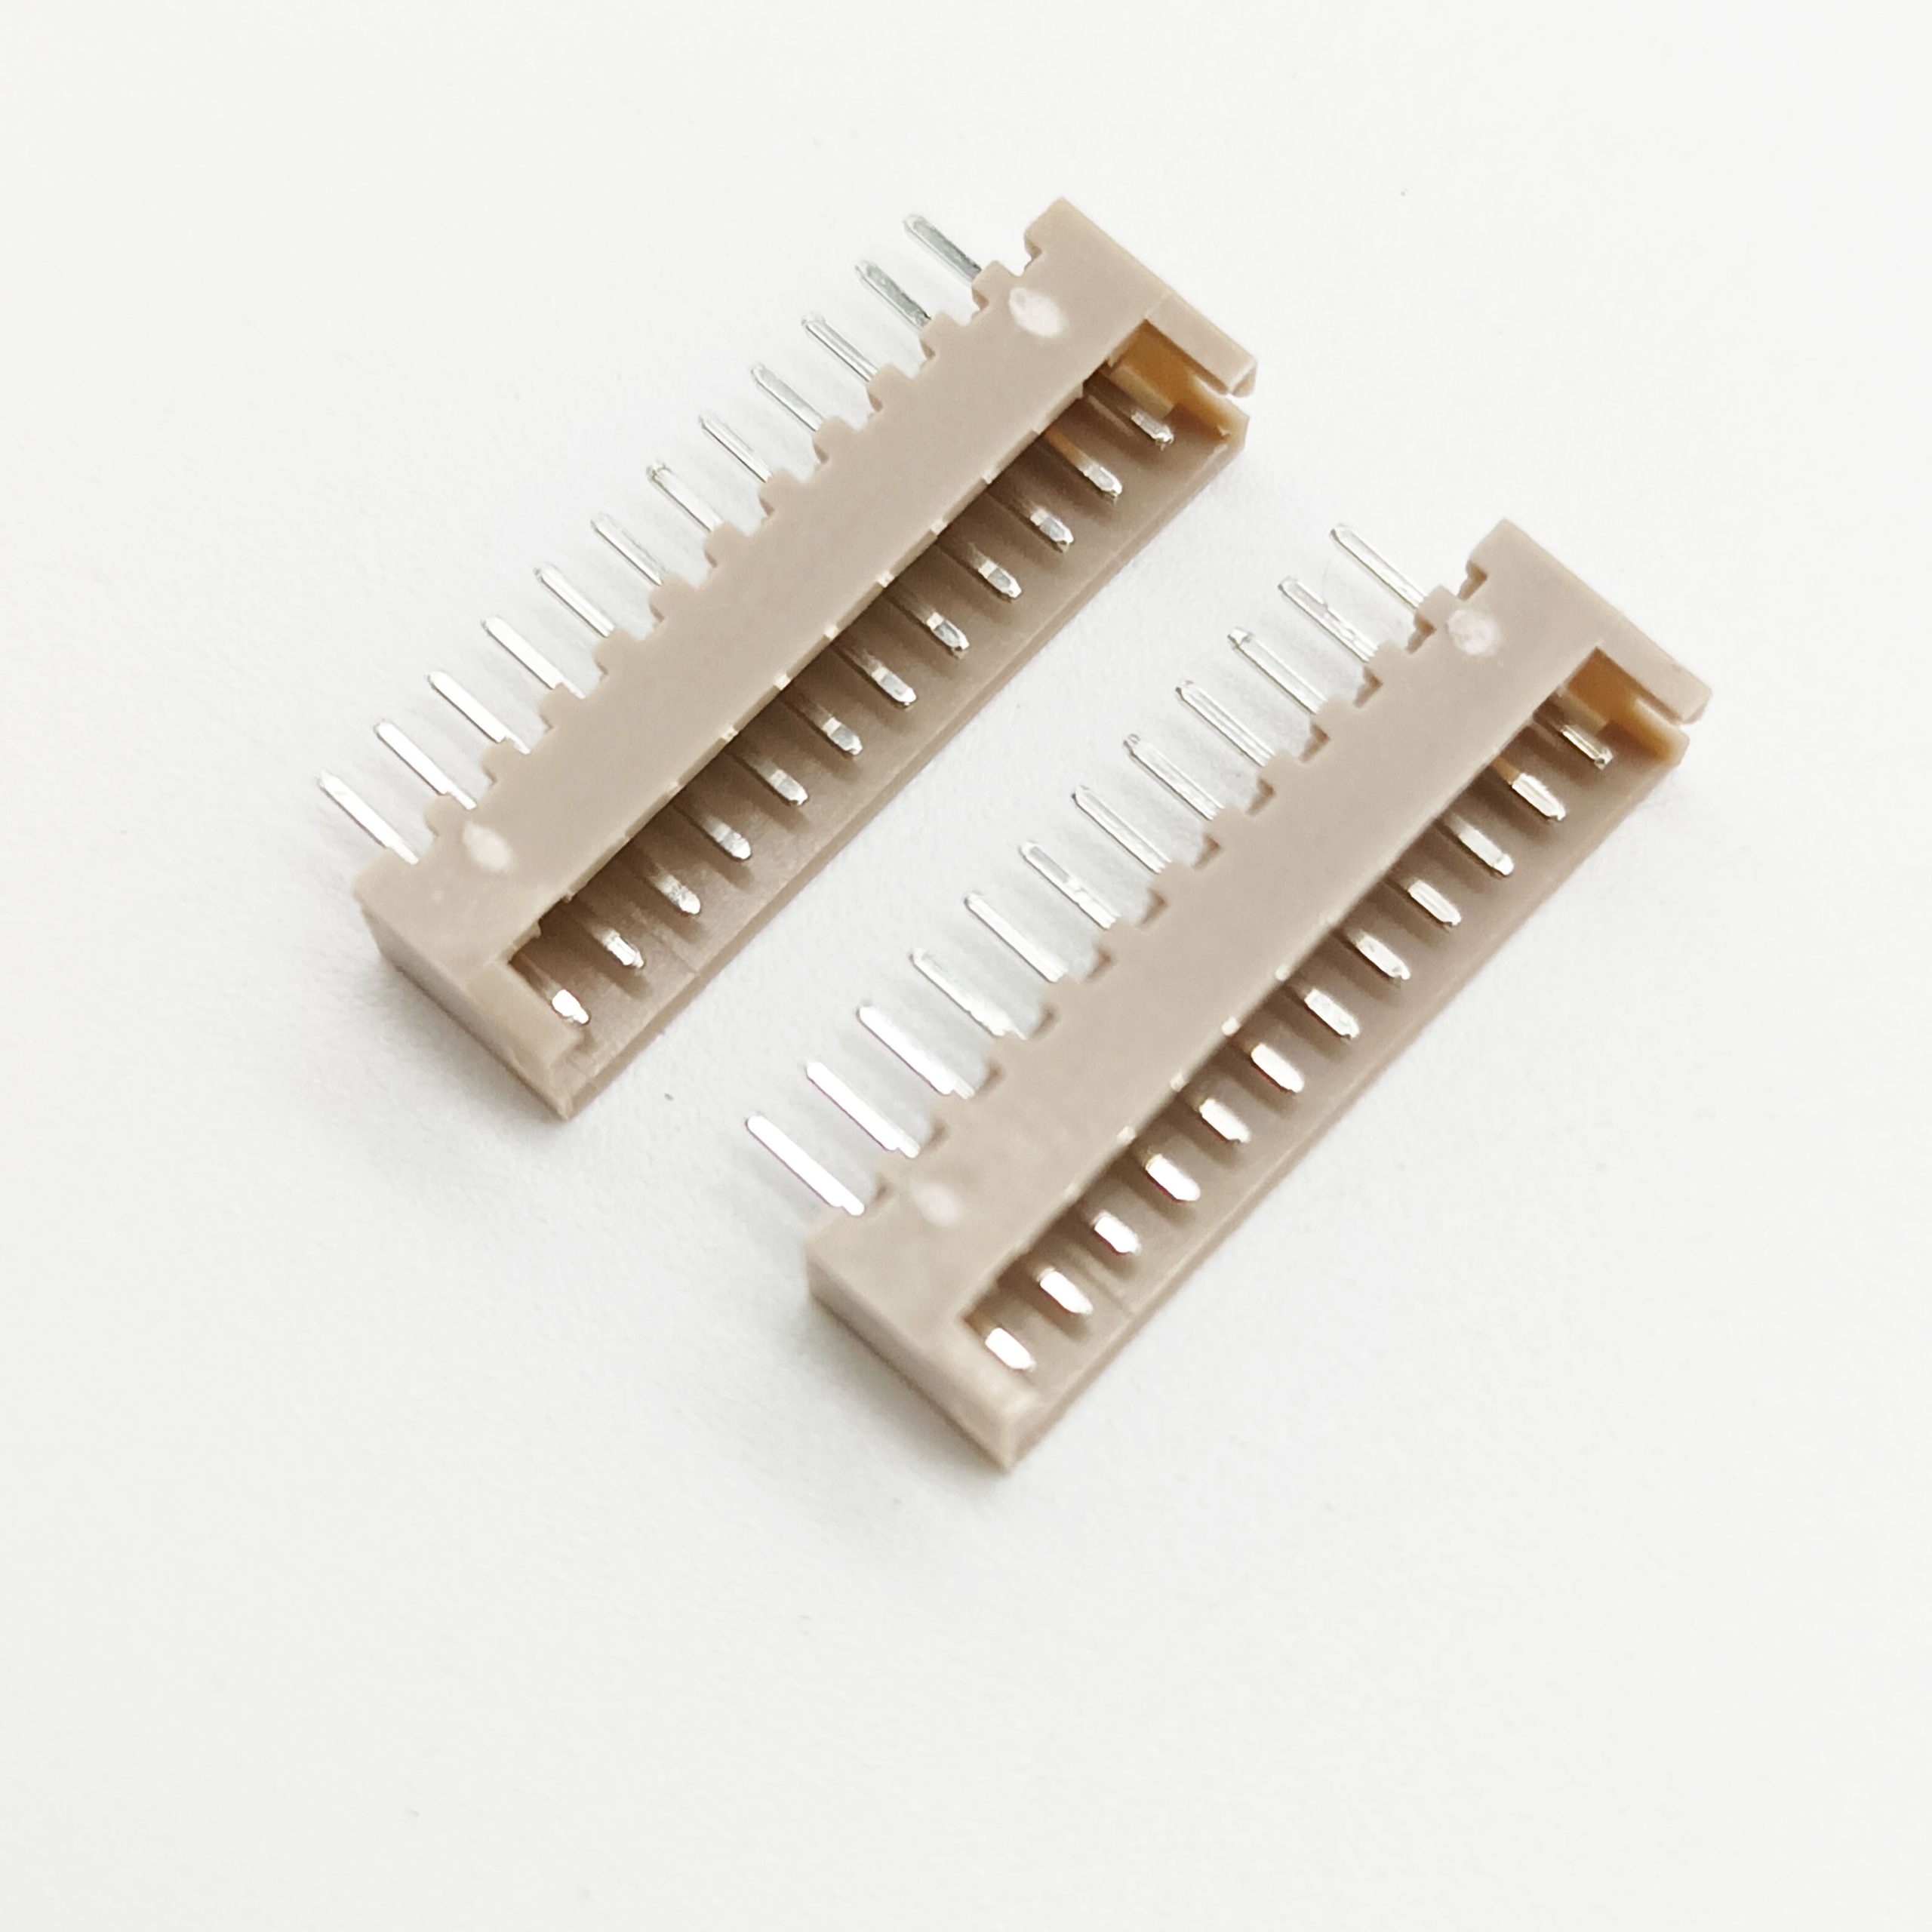 DF13-12P-1.25DSA is a versatile 12-pin connector with a 1.25mm pitch, ideal for compact electronic applications. Its reliability and durability make it a preferred choice for connecting various devices. 